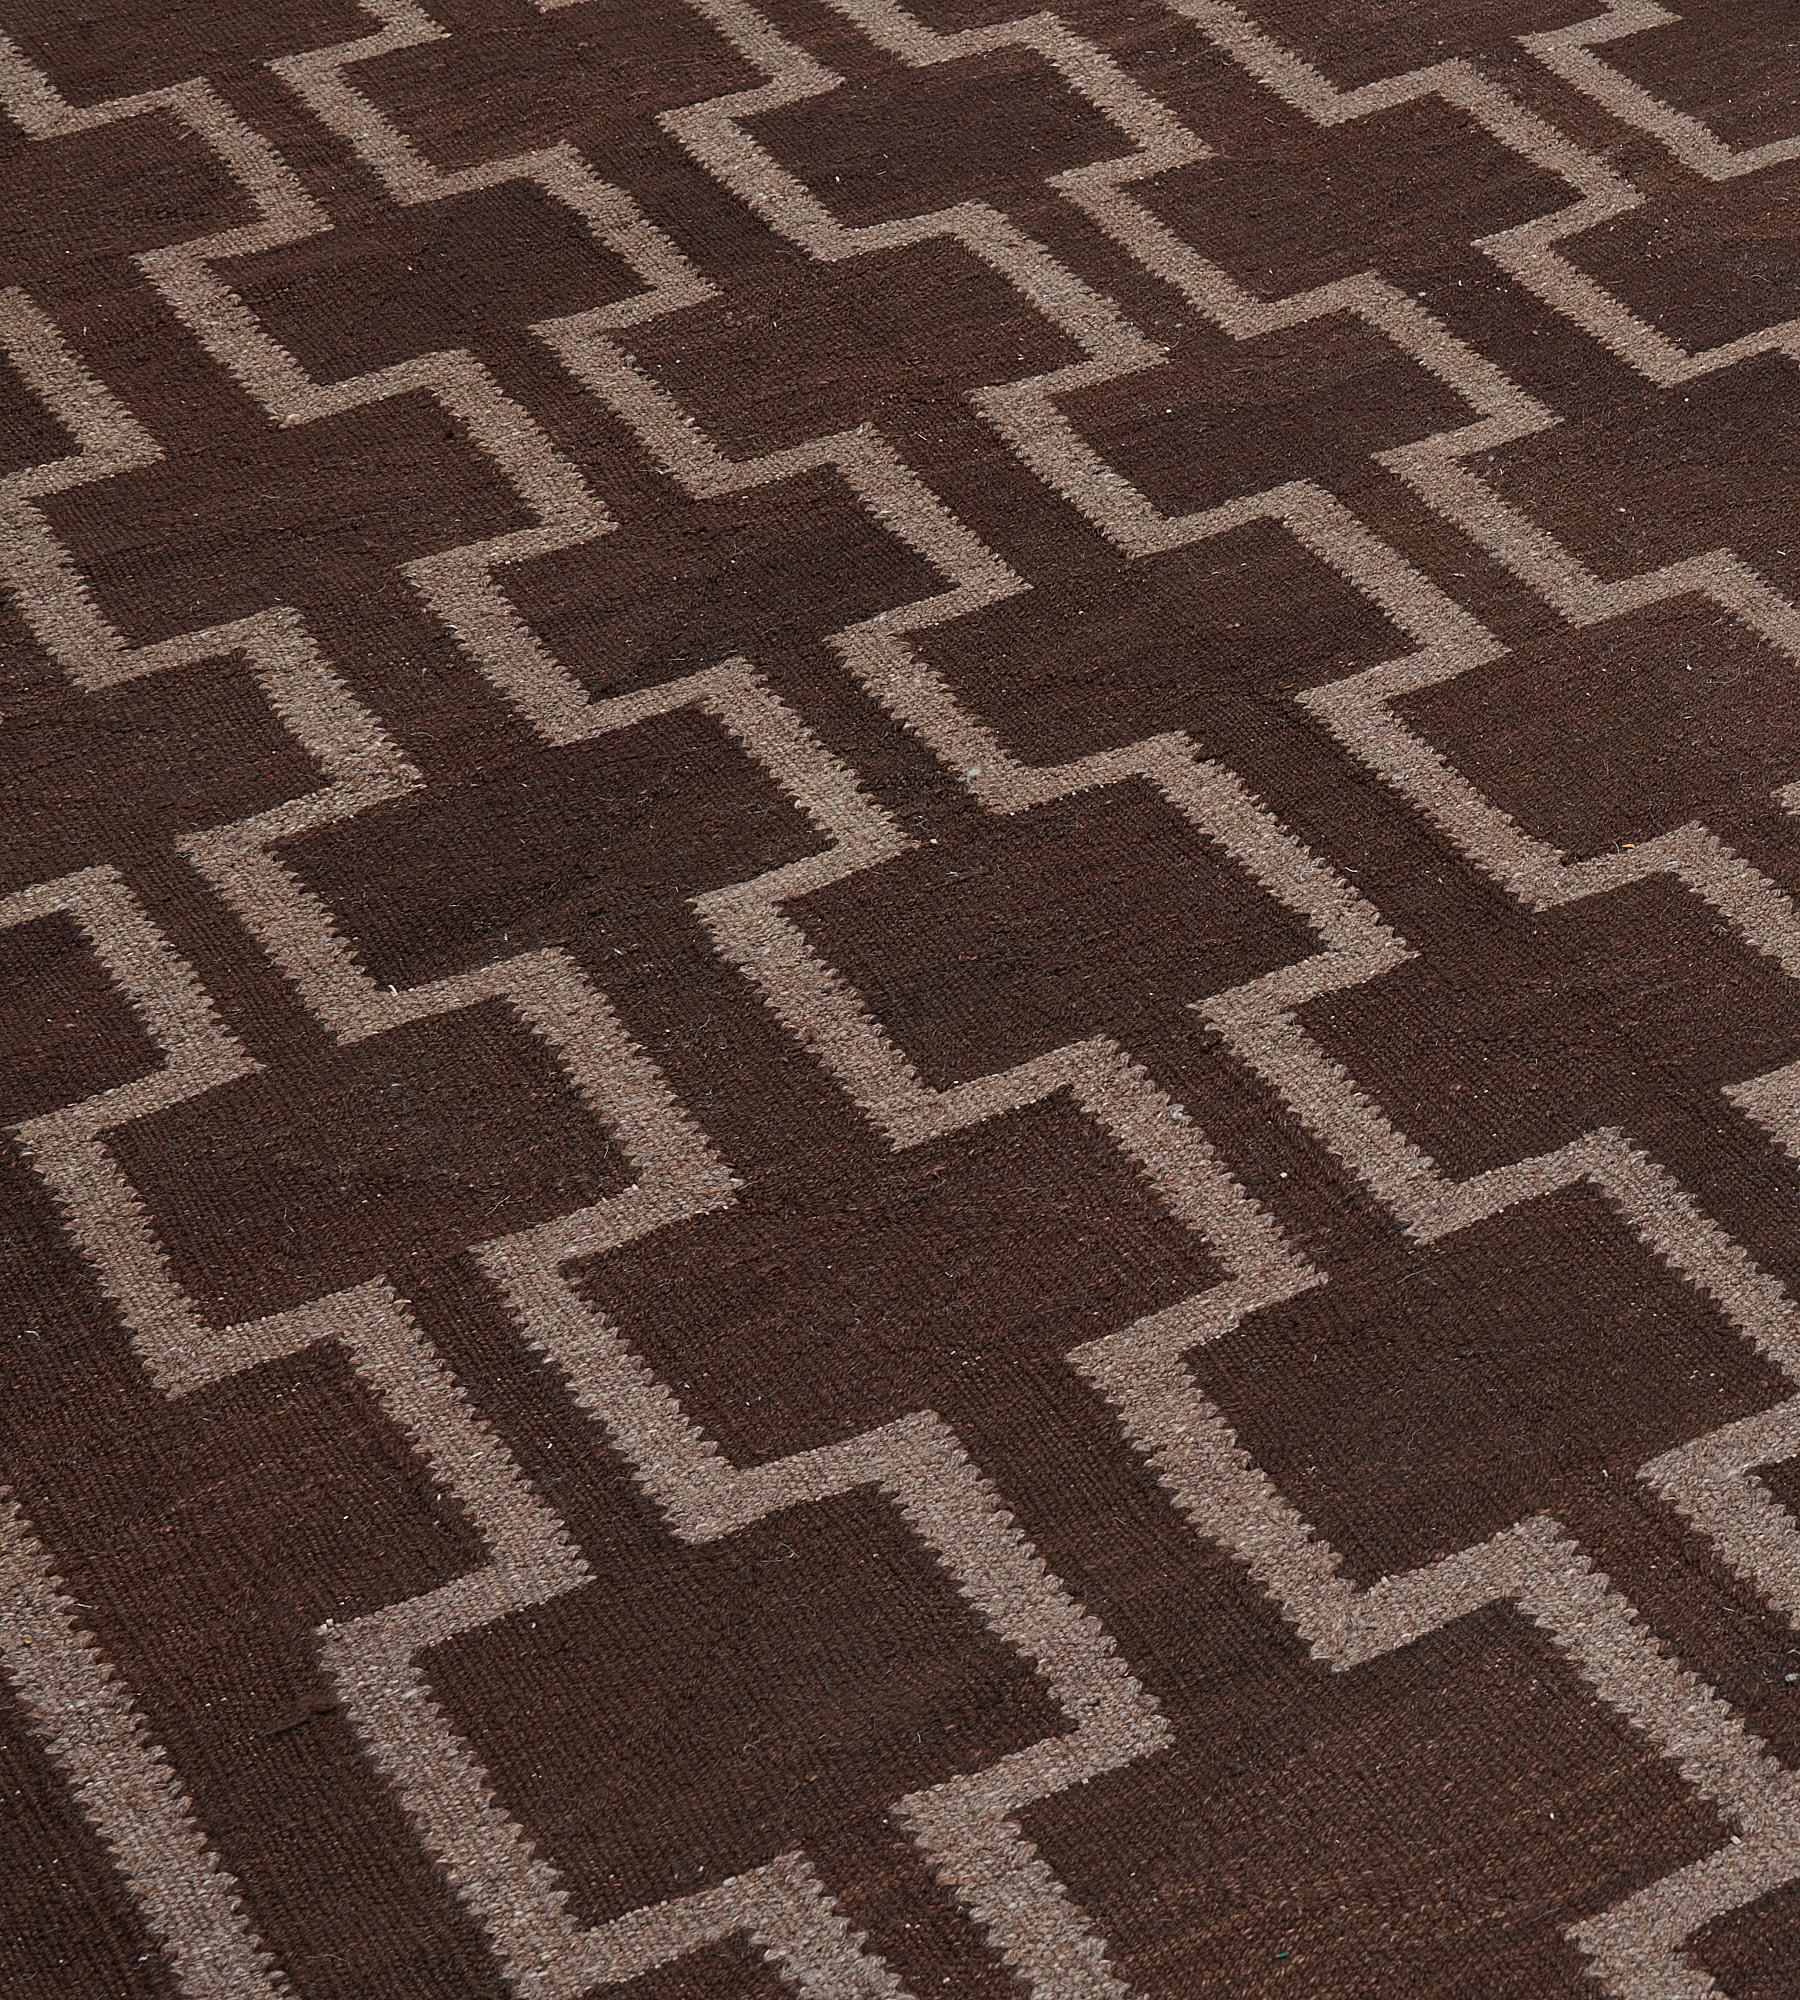 Part of the Mansour Modern collection, this flatweave rug is handwoven by master weavers using the finest quality techniques and materials.